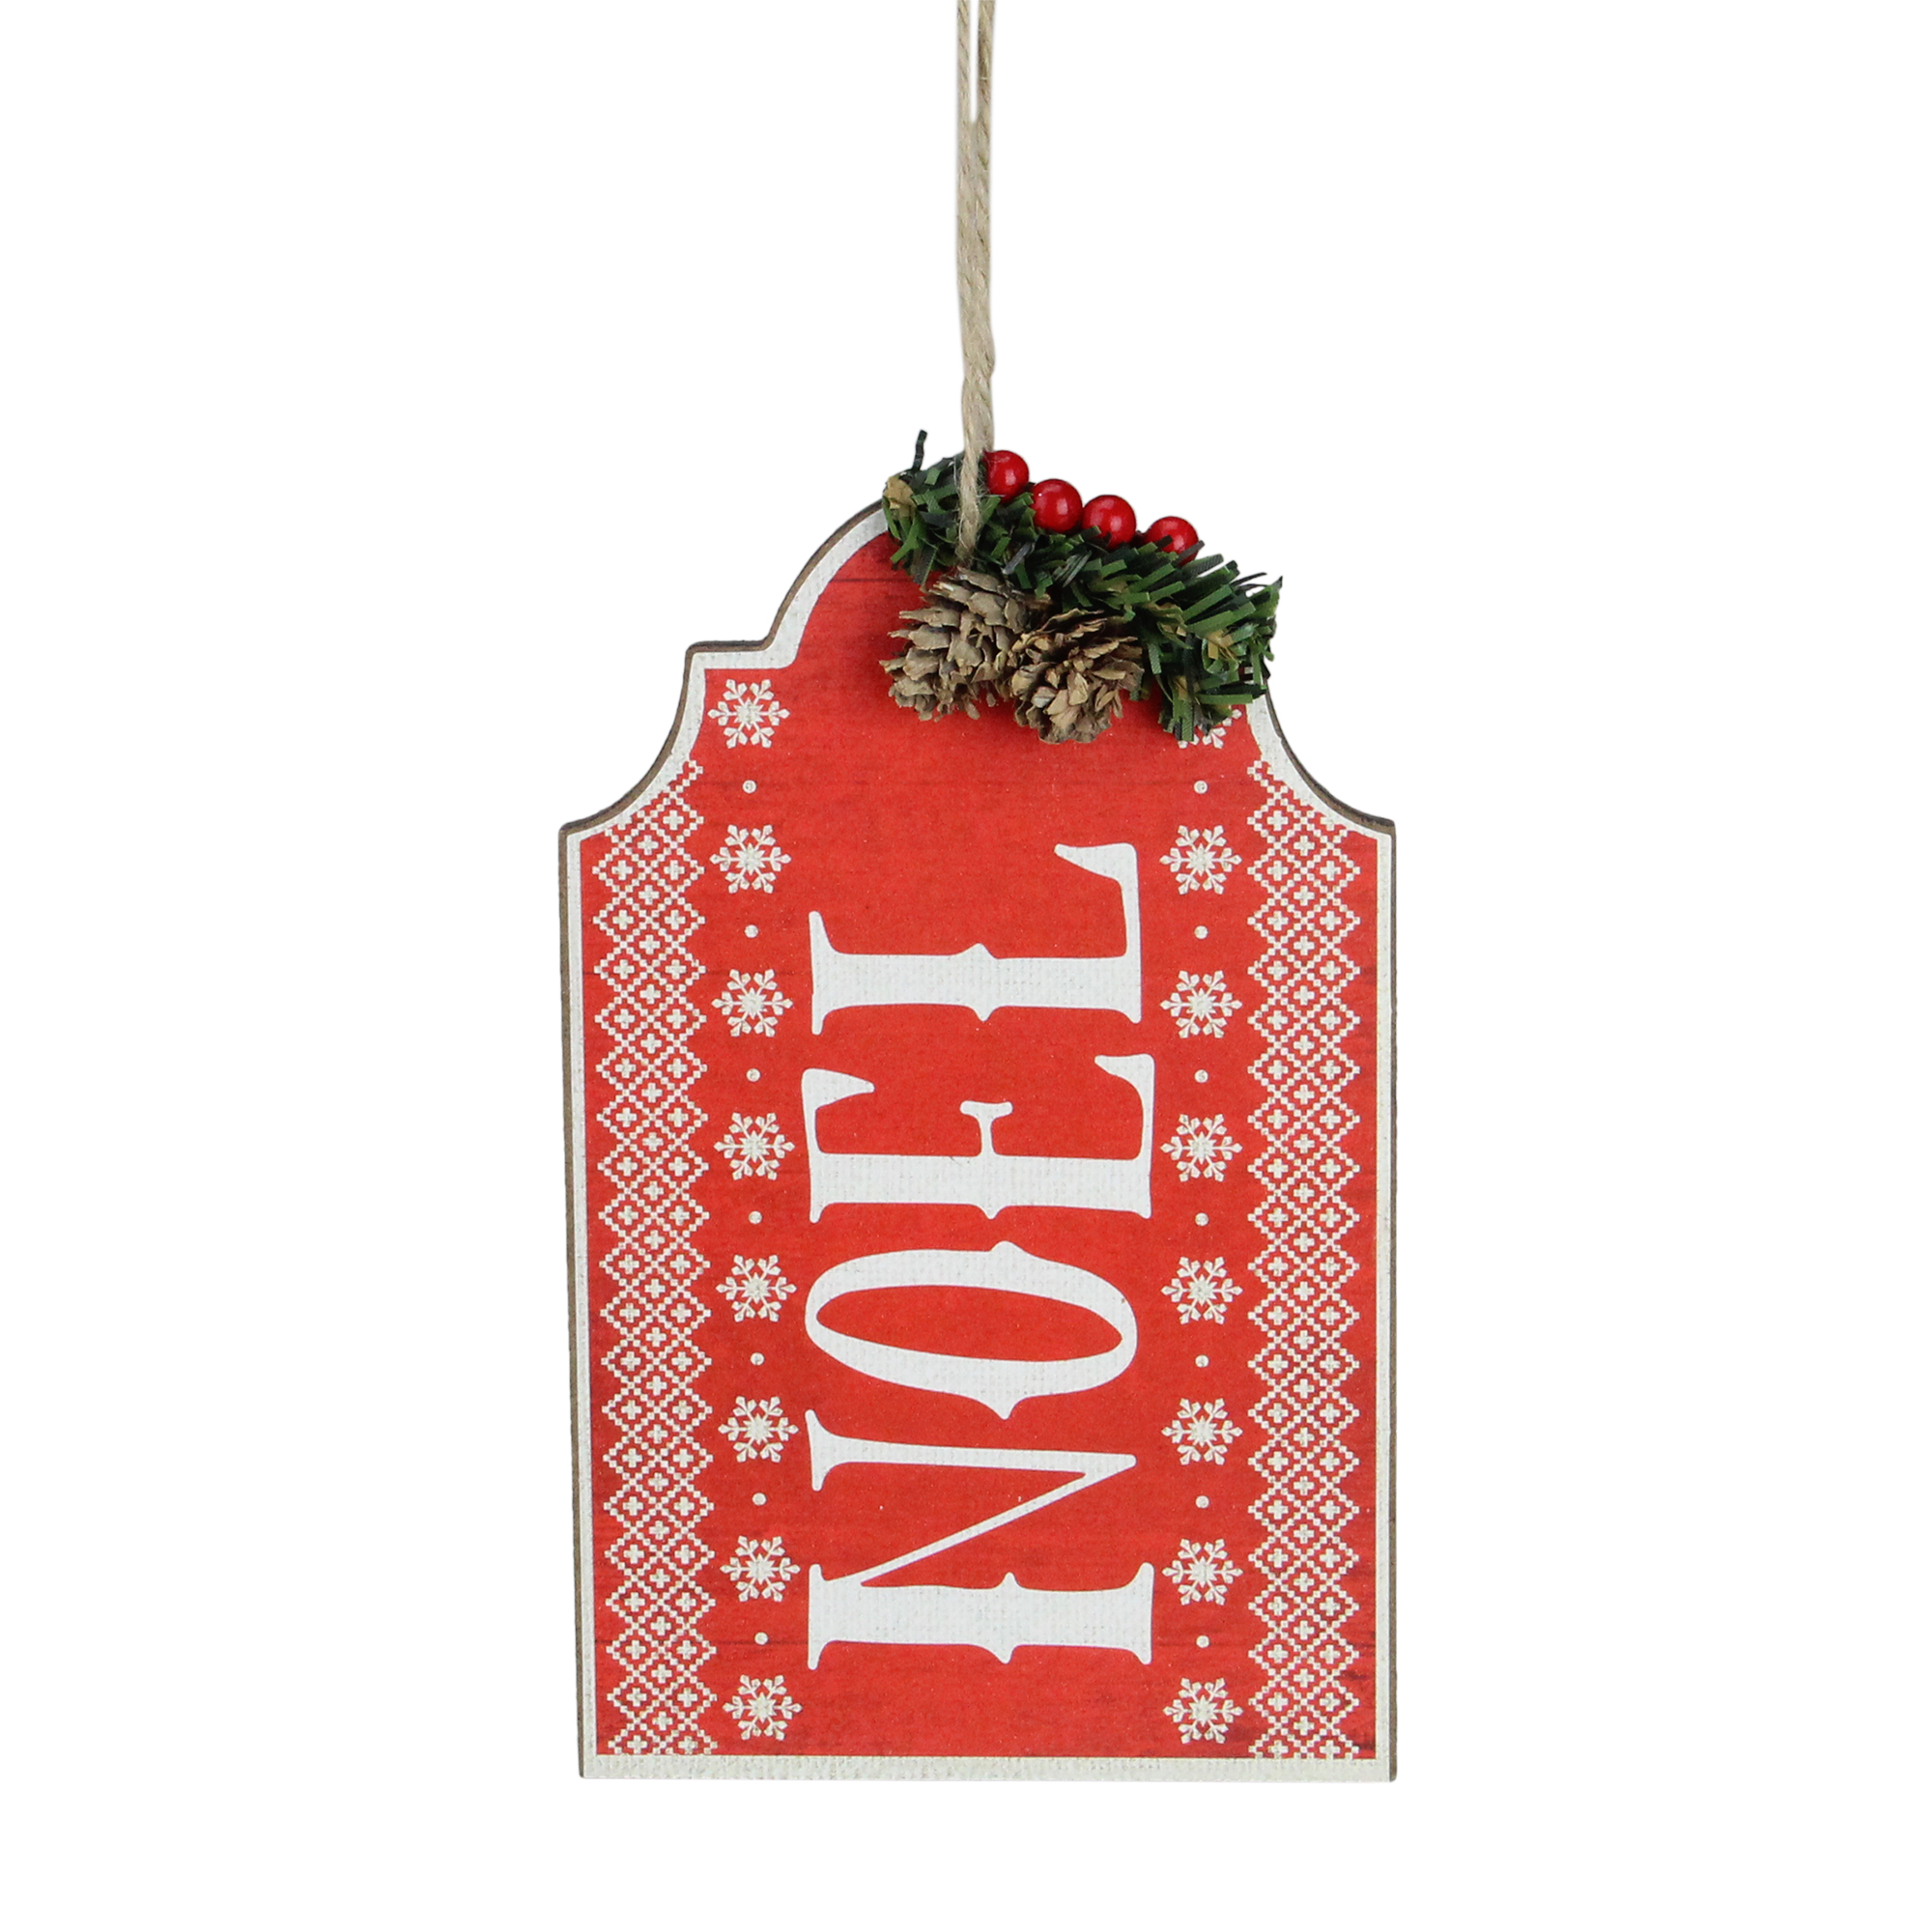 CC Christmas Decor 8" Red and White Snowflake Pattern "Noel" Christmas Wall Plaque